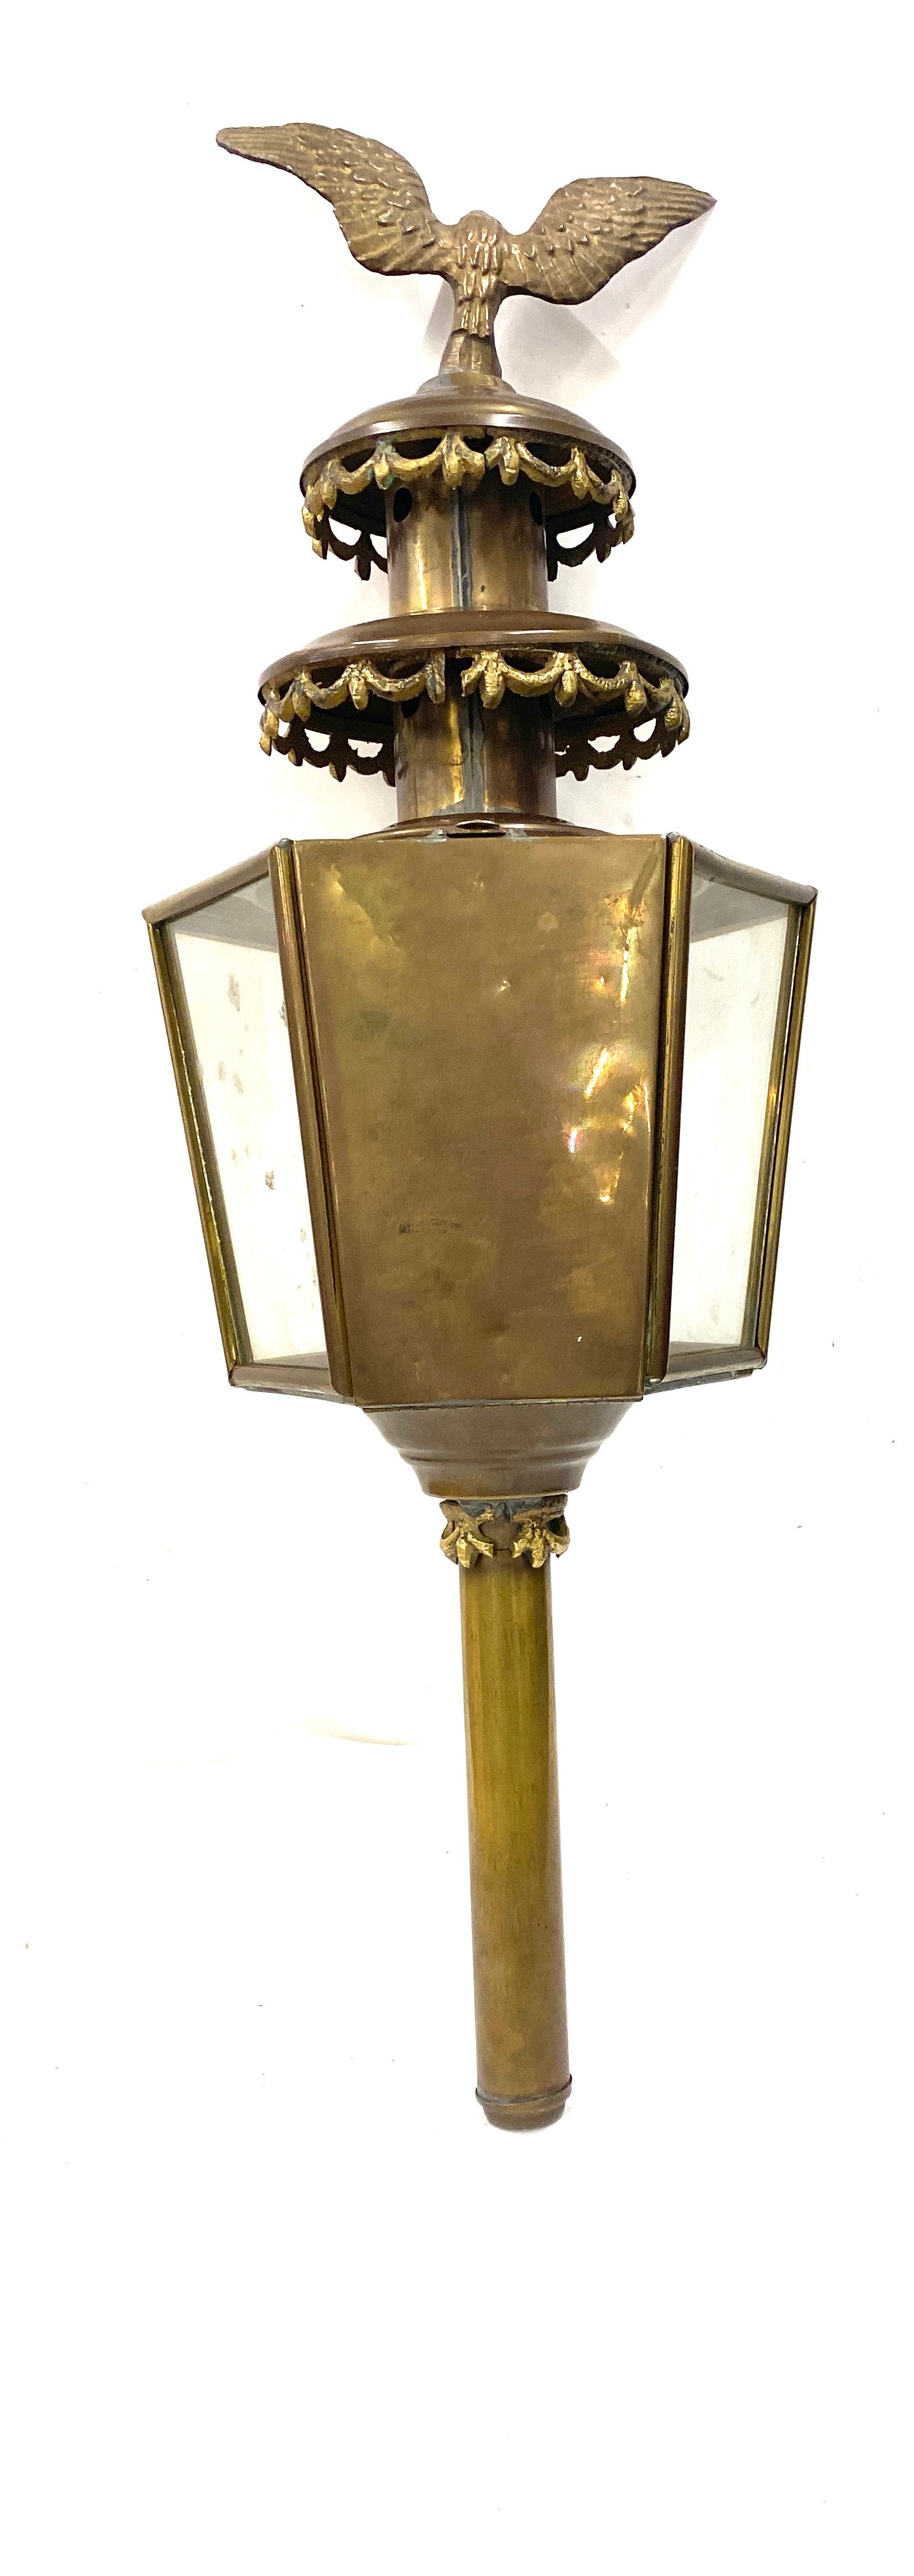 Vintage brass outdoor carriage light, height 26 inches - Image 6 of 6